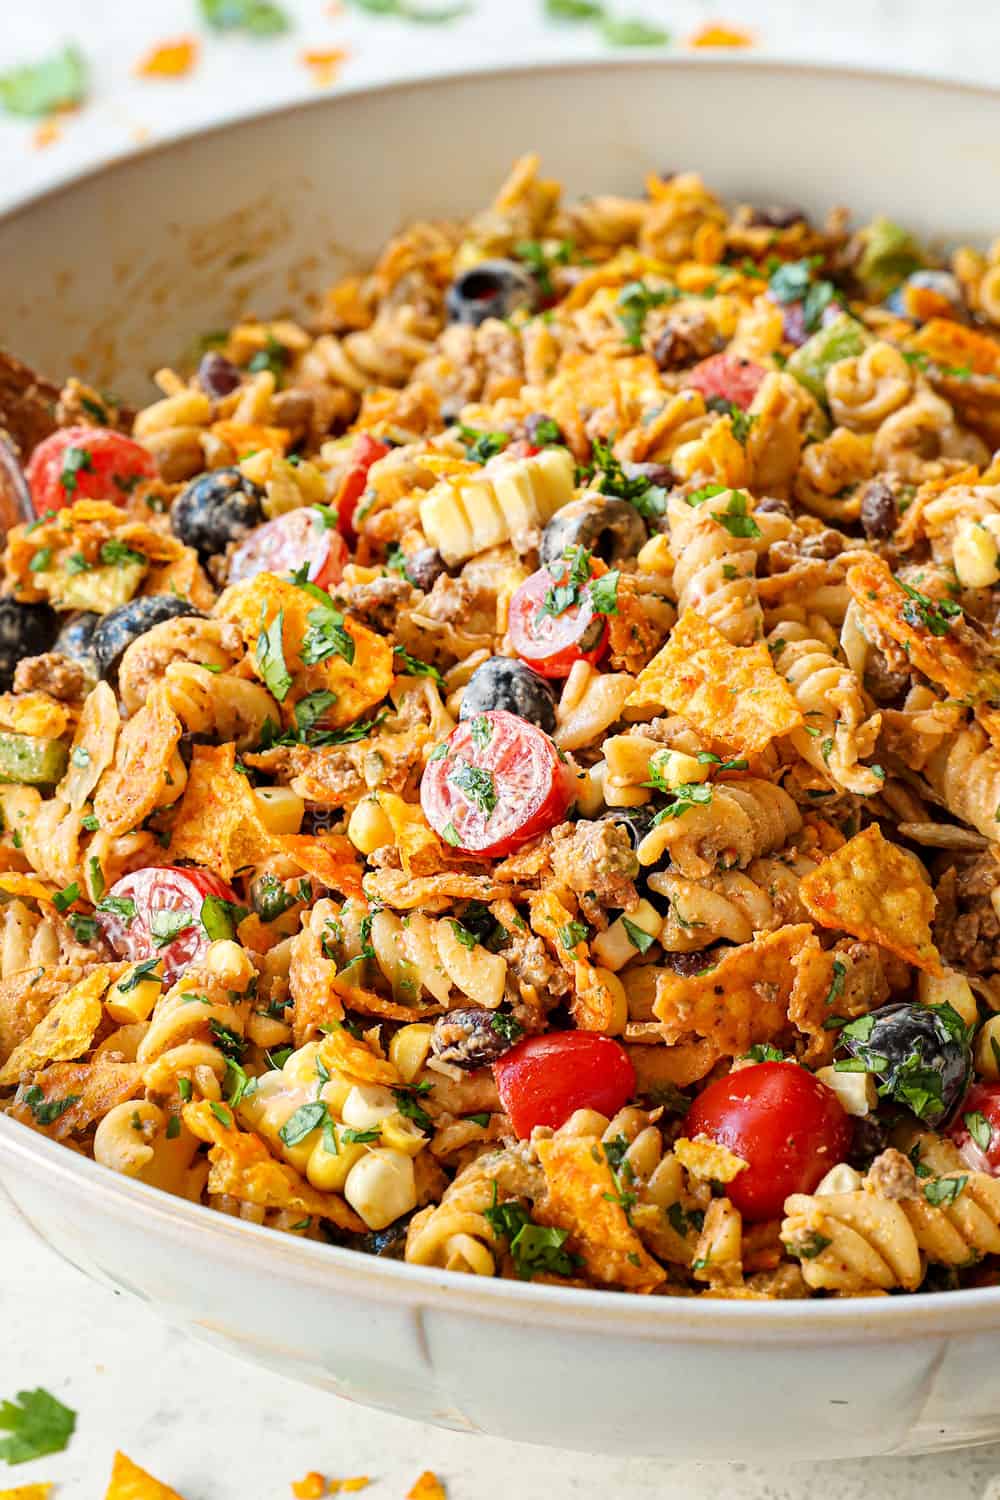 taco pasta salad recipe in a white bowl with ground beef, cheese, lettuce, tomatoes, black beans